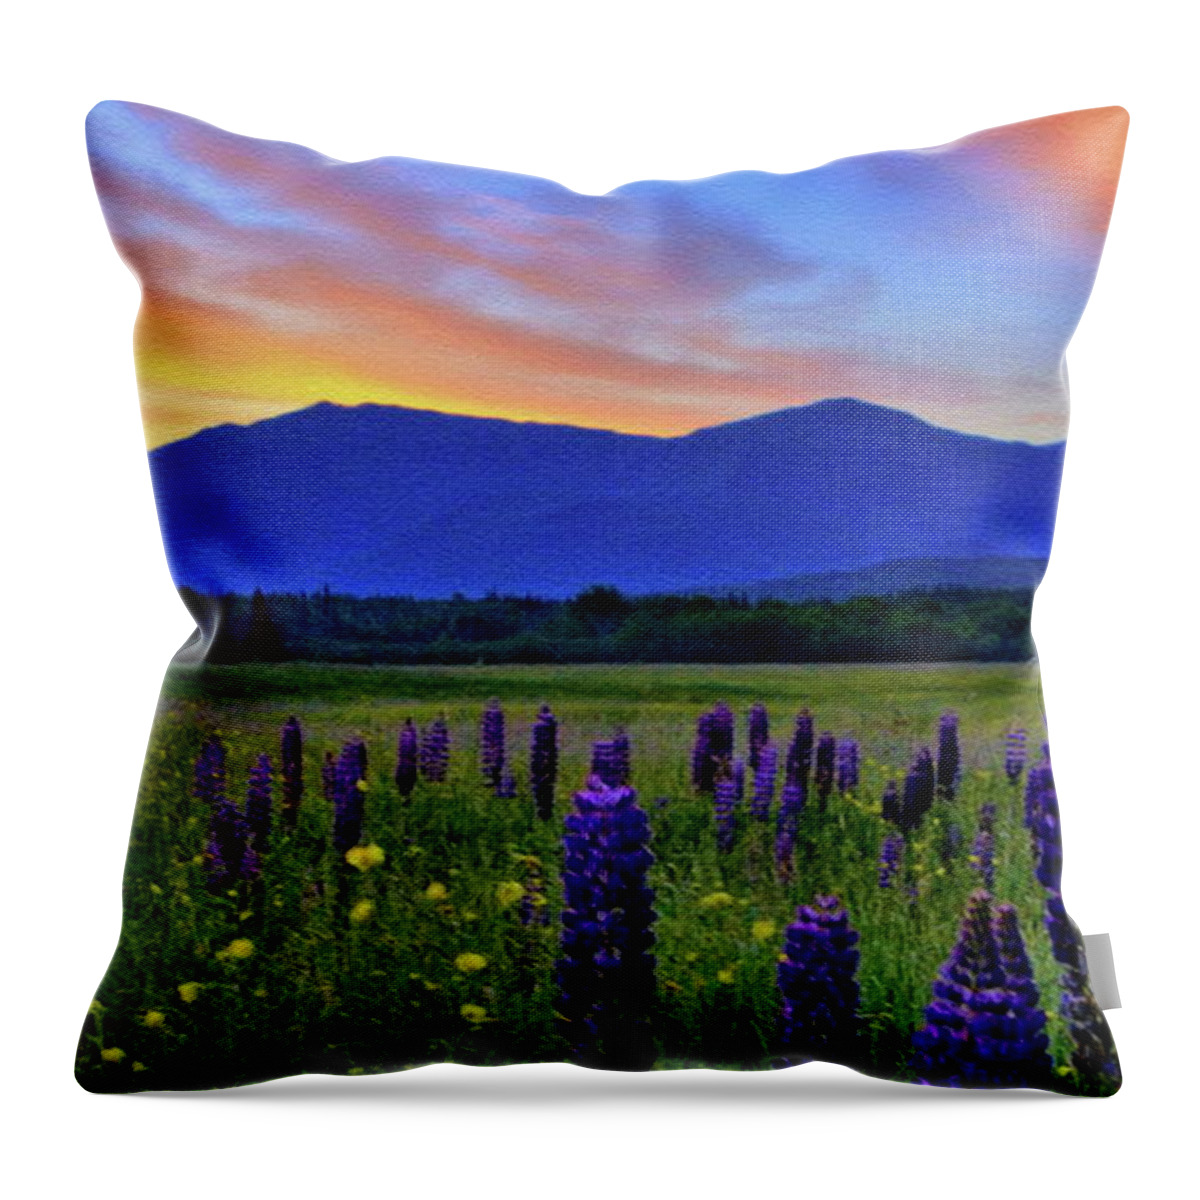 The Presidential Range Throw Pillow featuring the pyrography Sunrise On The Presidentials by Harry Moulton